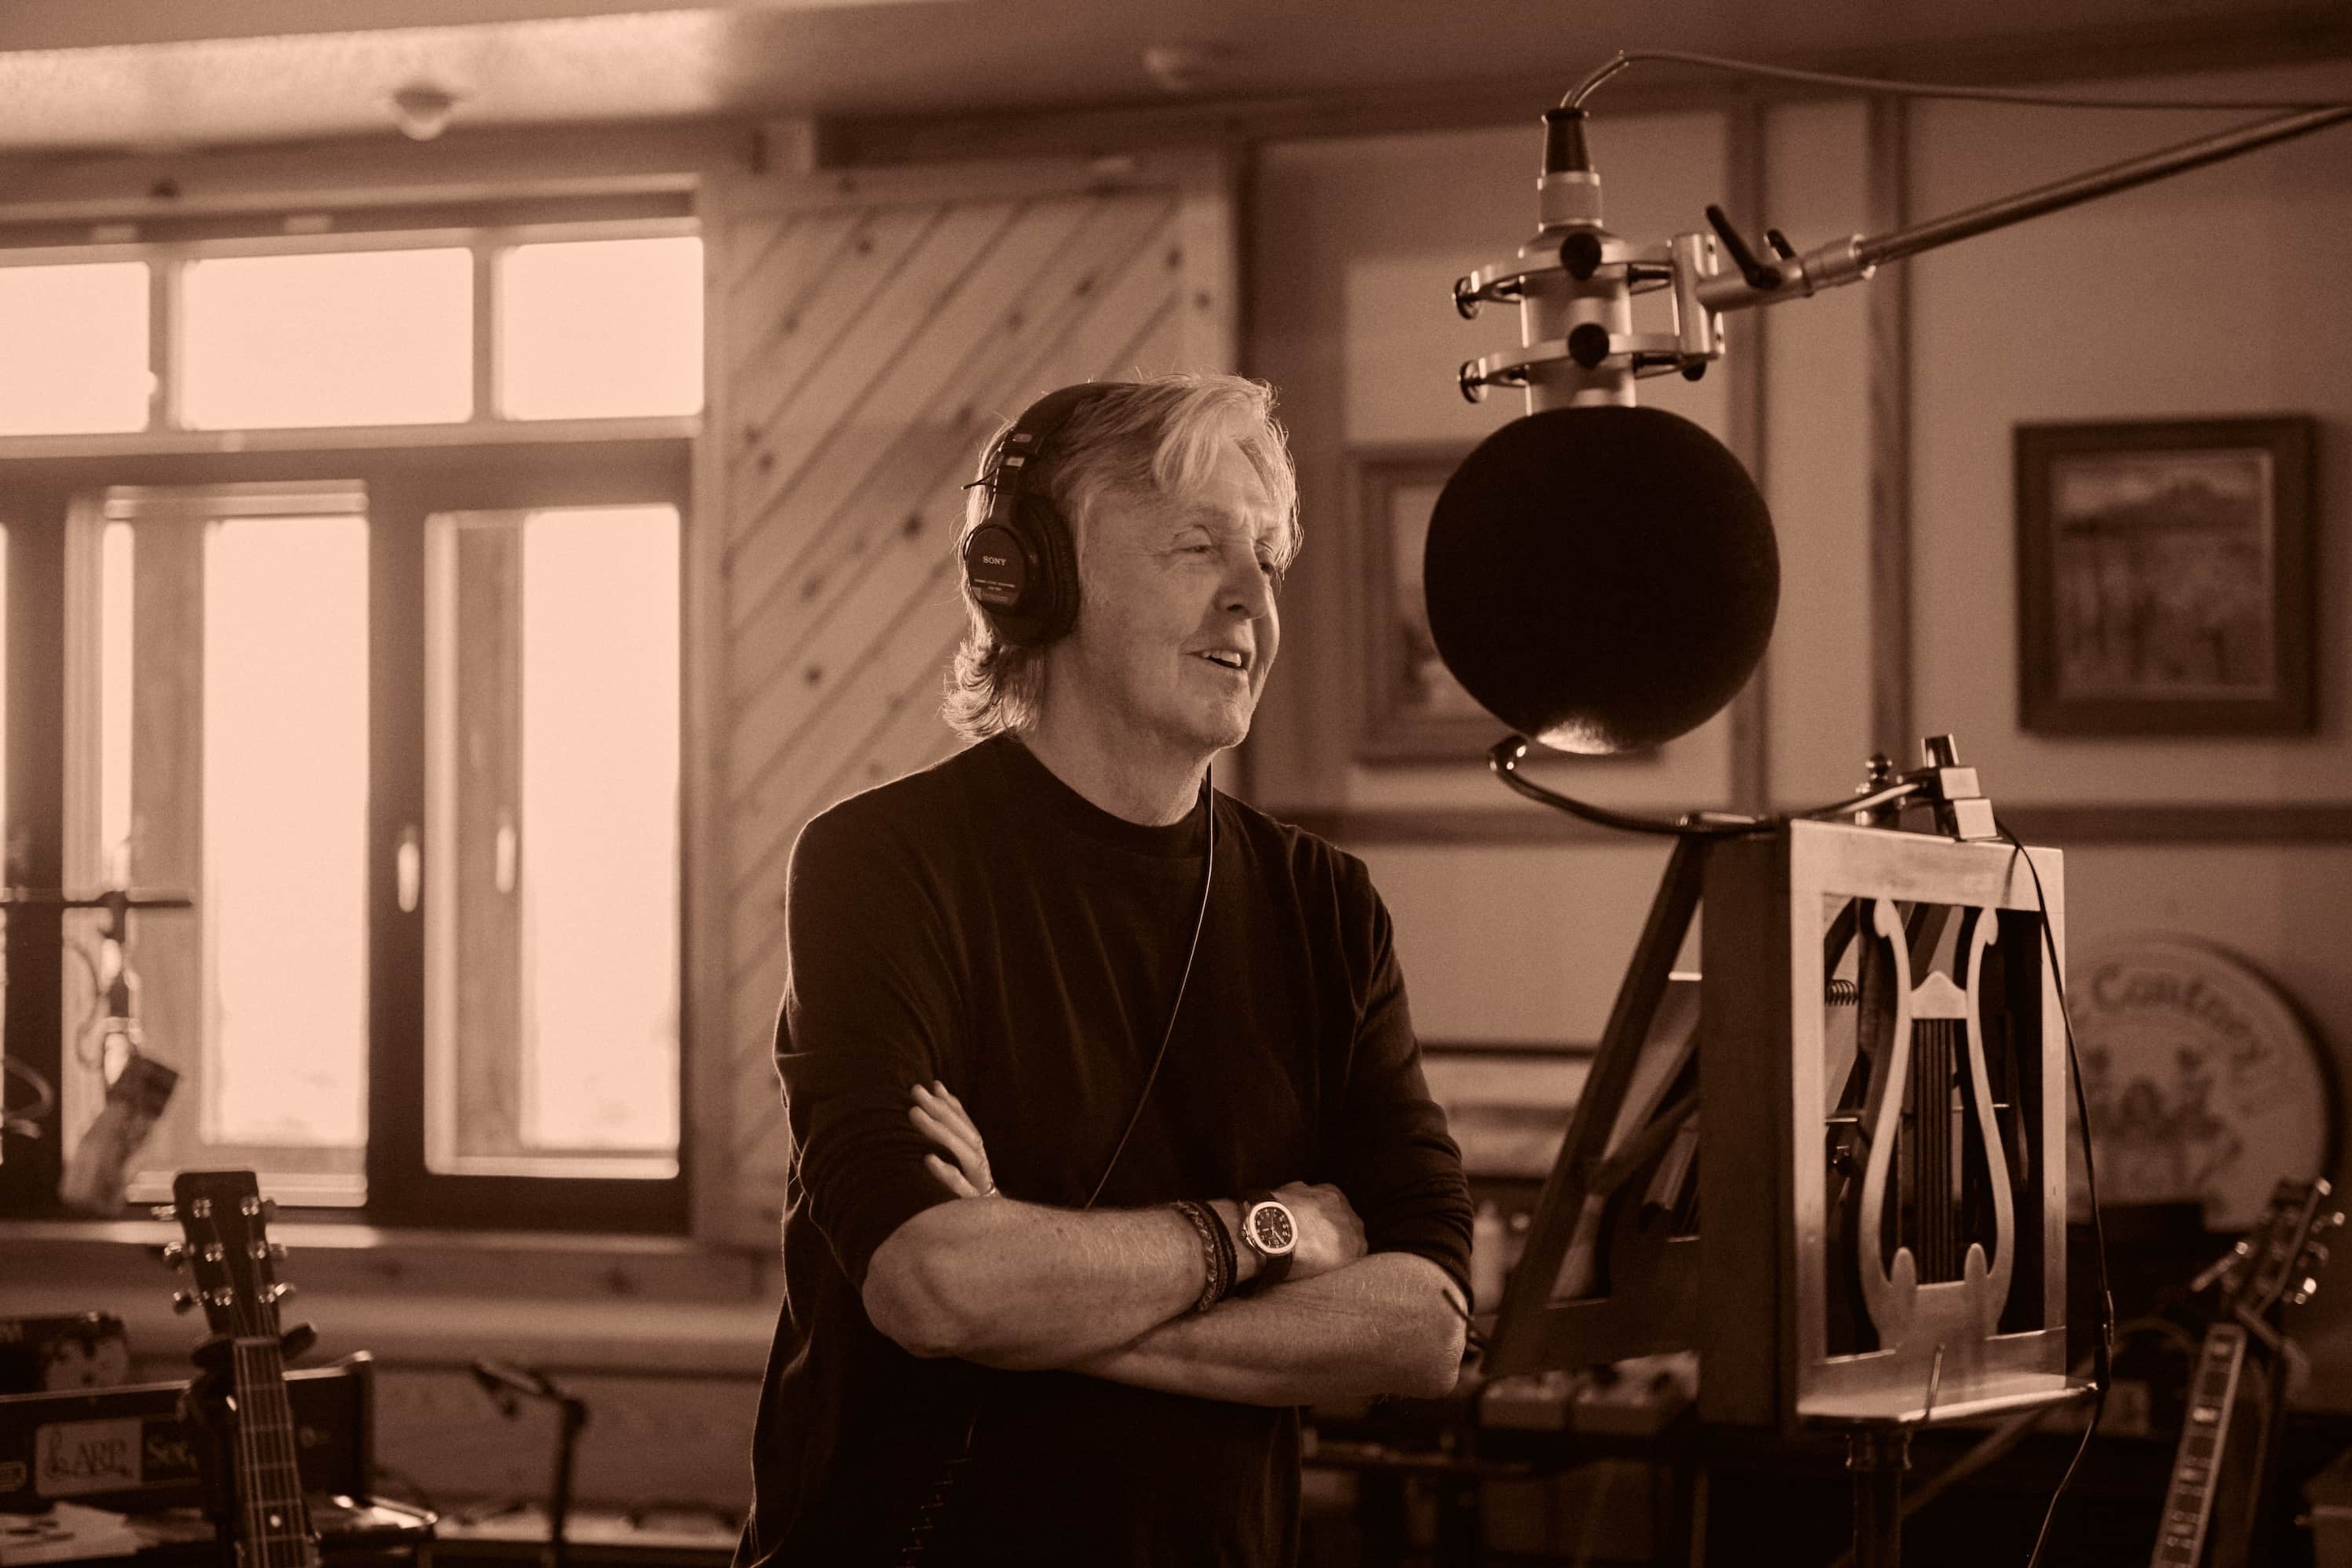 Sepia photo of Paul at the mic stand recording 'McCartney III'